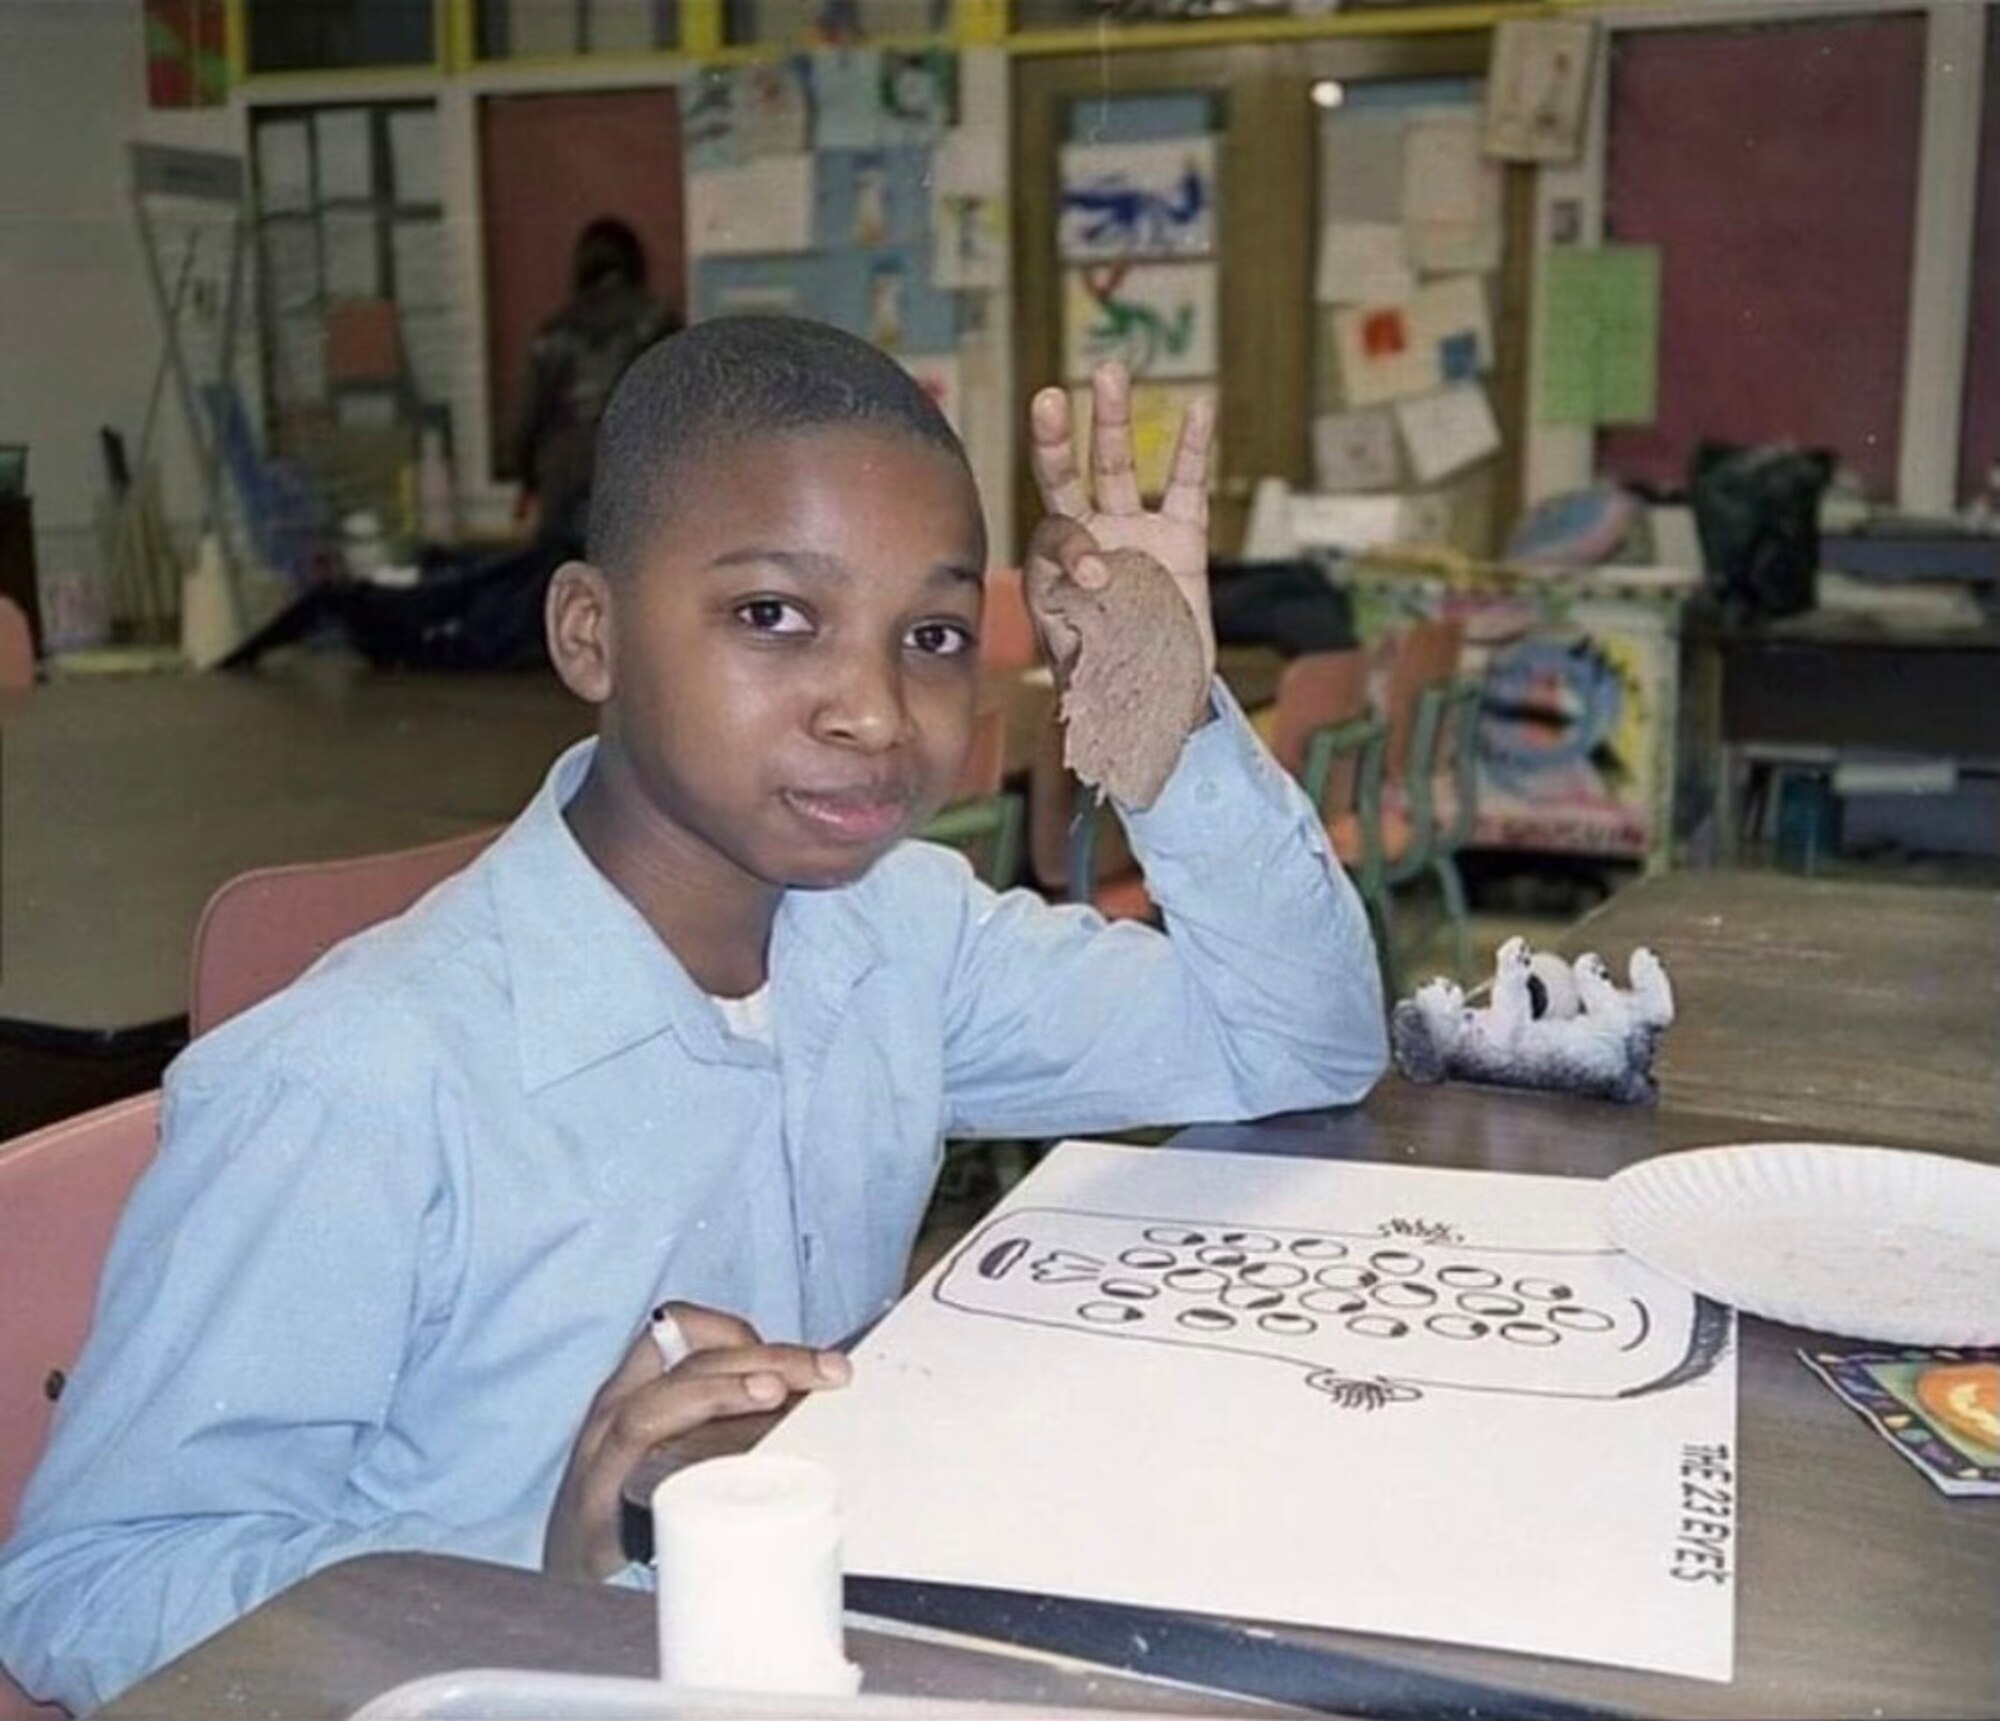 Michael Mason poses for a photo while working on an art project at St. Thomas The Apostle Catholic Grade School, Chicago, Illinois, 2008. Mason is currently serving as a patrolman at the 97th Security Forces Squadron at Altus Air Force Base, Oklahoma. (Courtesy photo by Airman 1st Class Michael Mason)